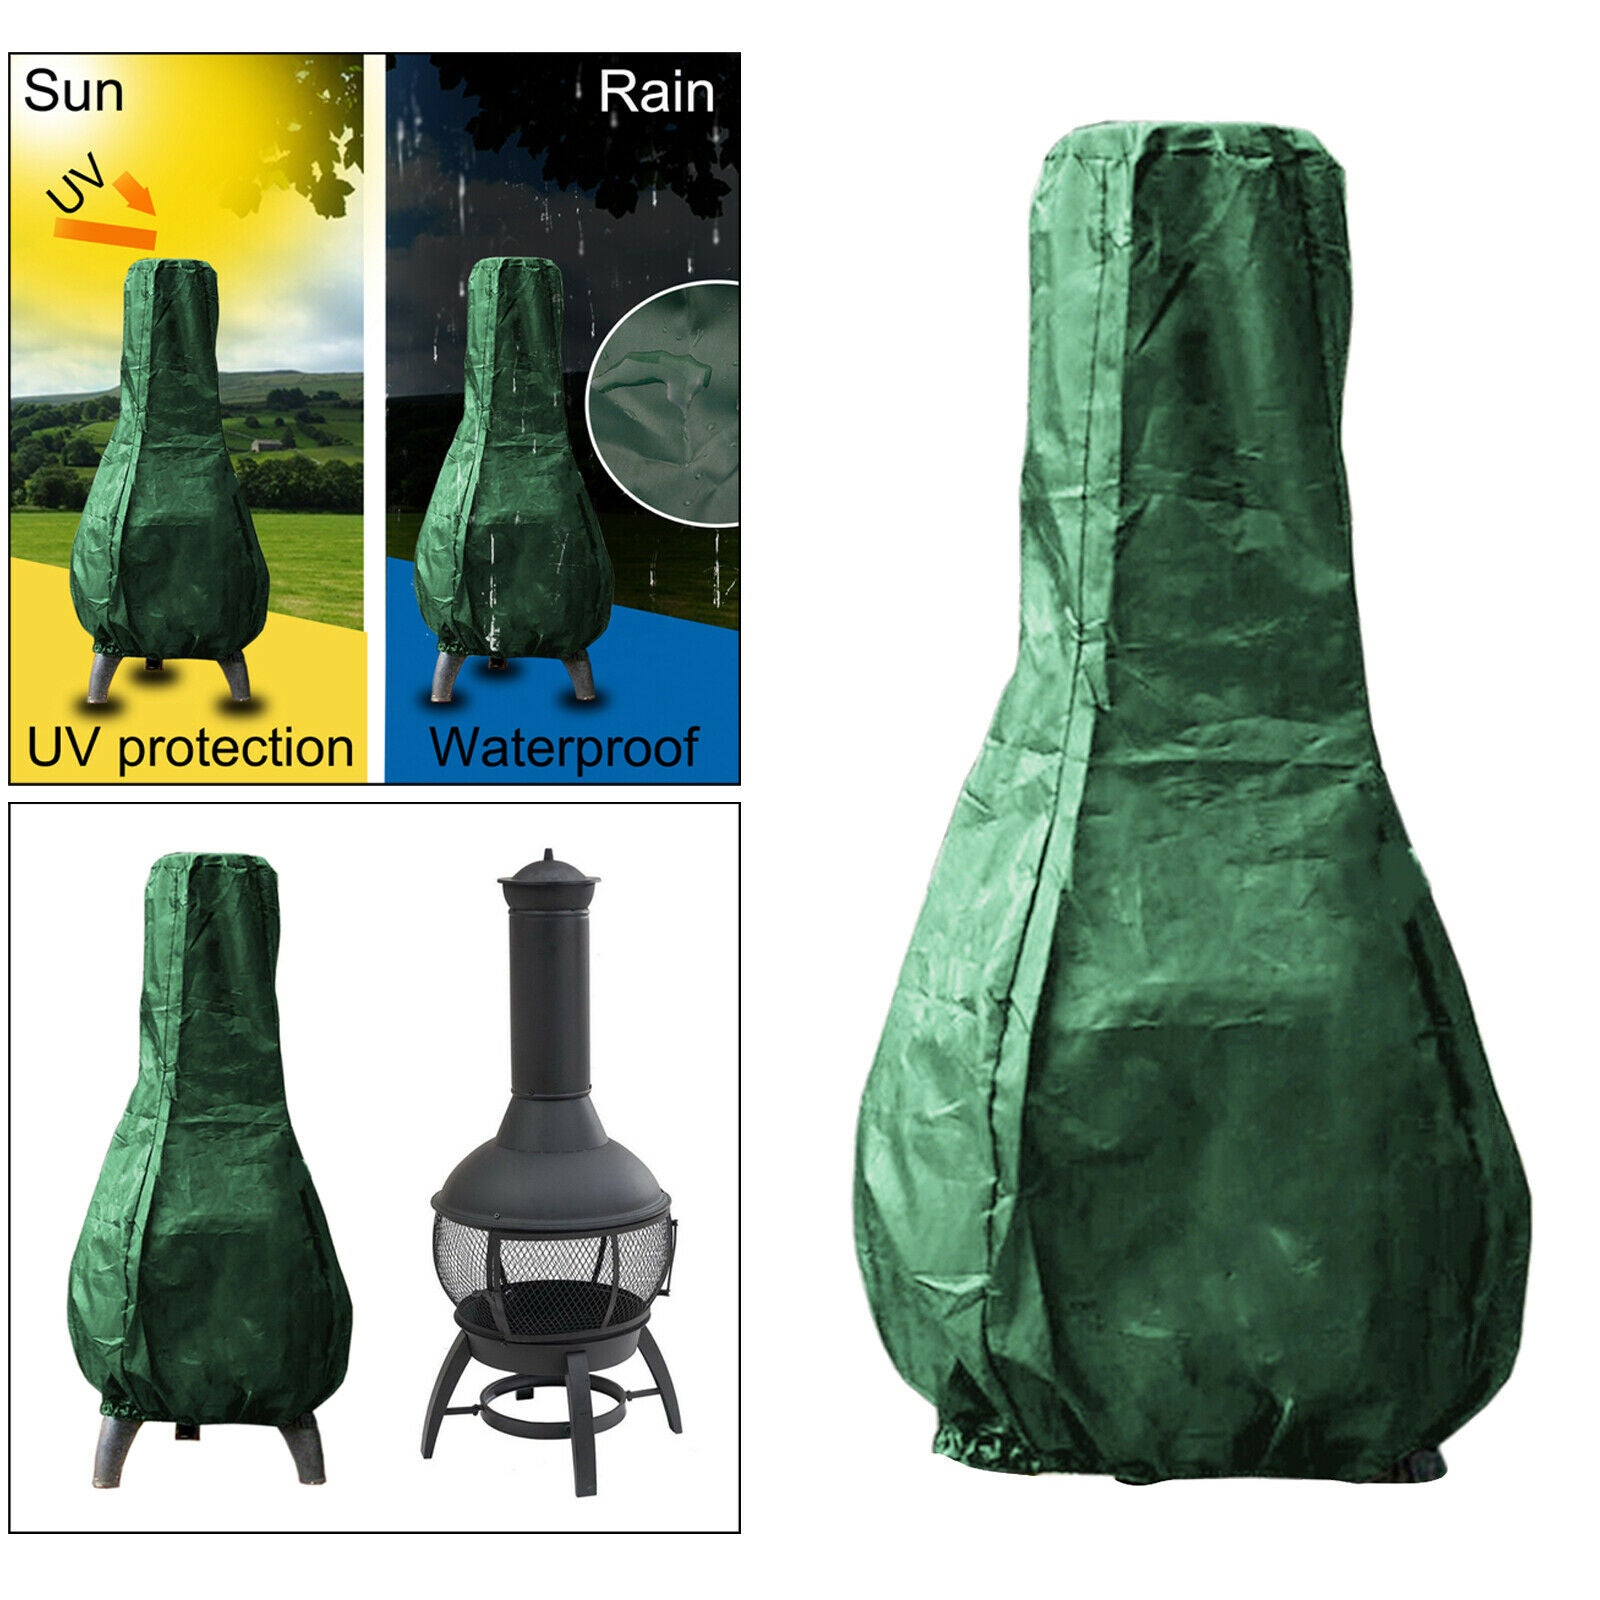 Polyester Chiminea Fire Pit Cover Waterproof Outdoor Grill Stove - Green